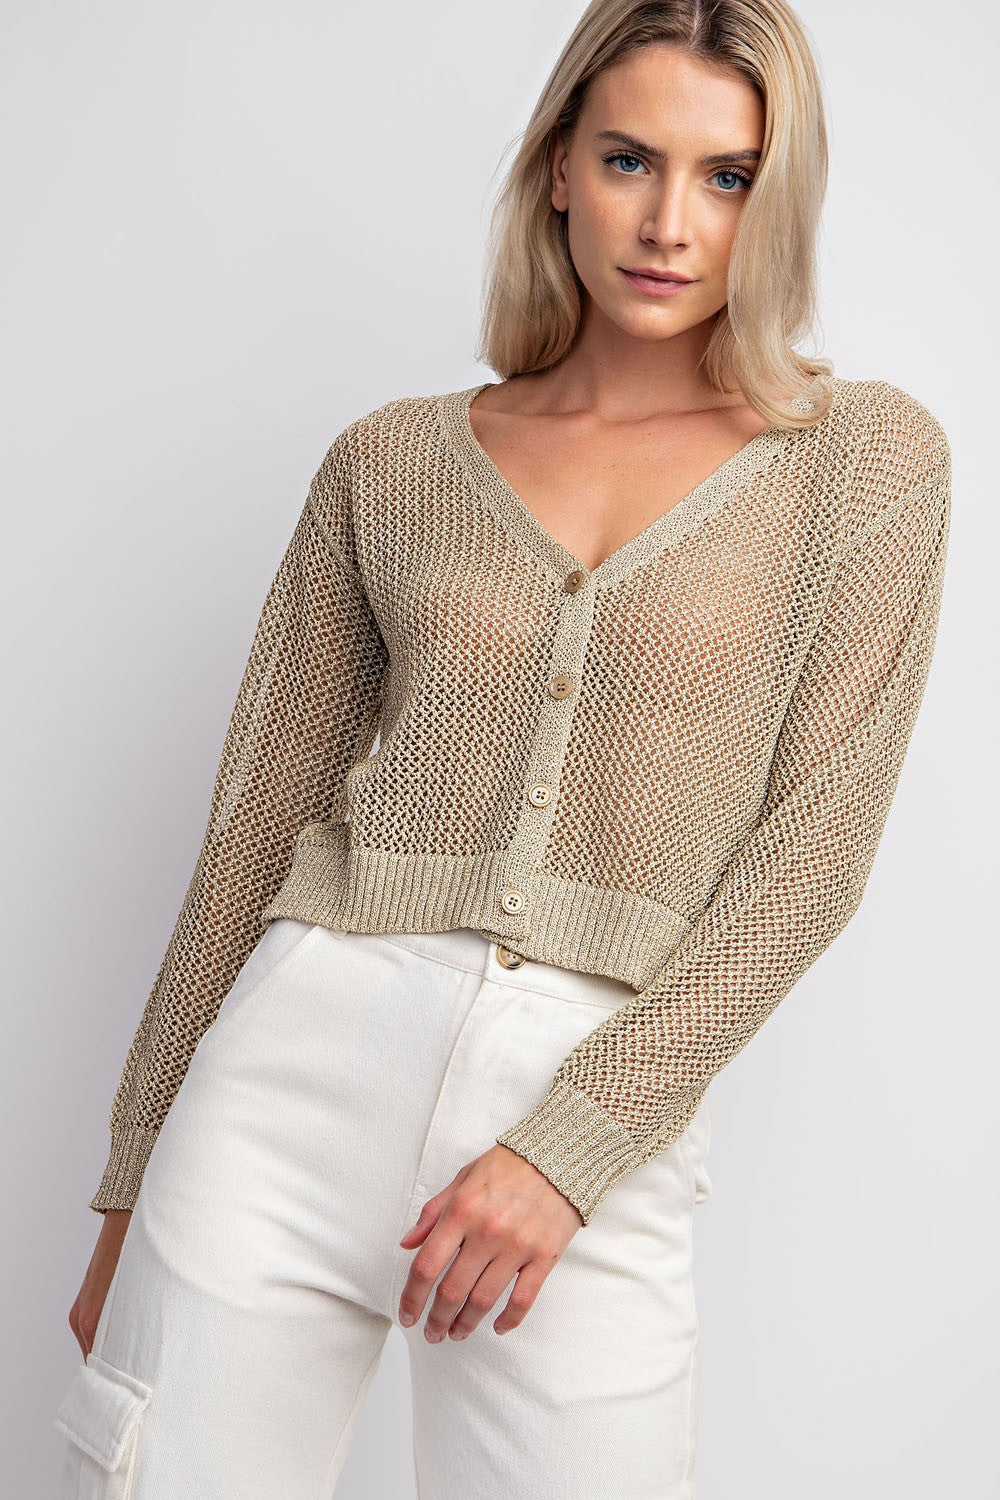 Lights Out Cardigan